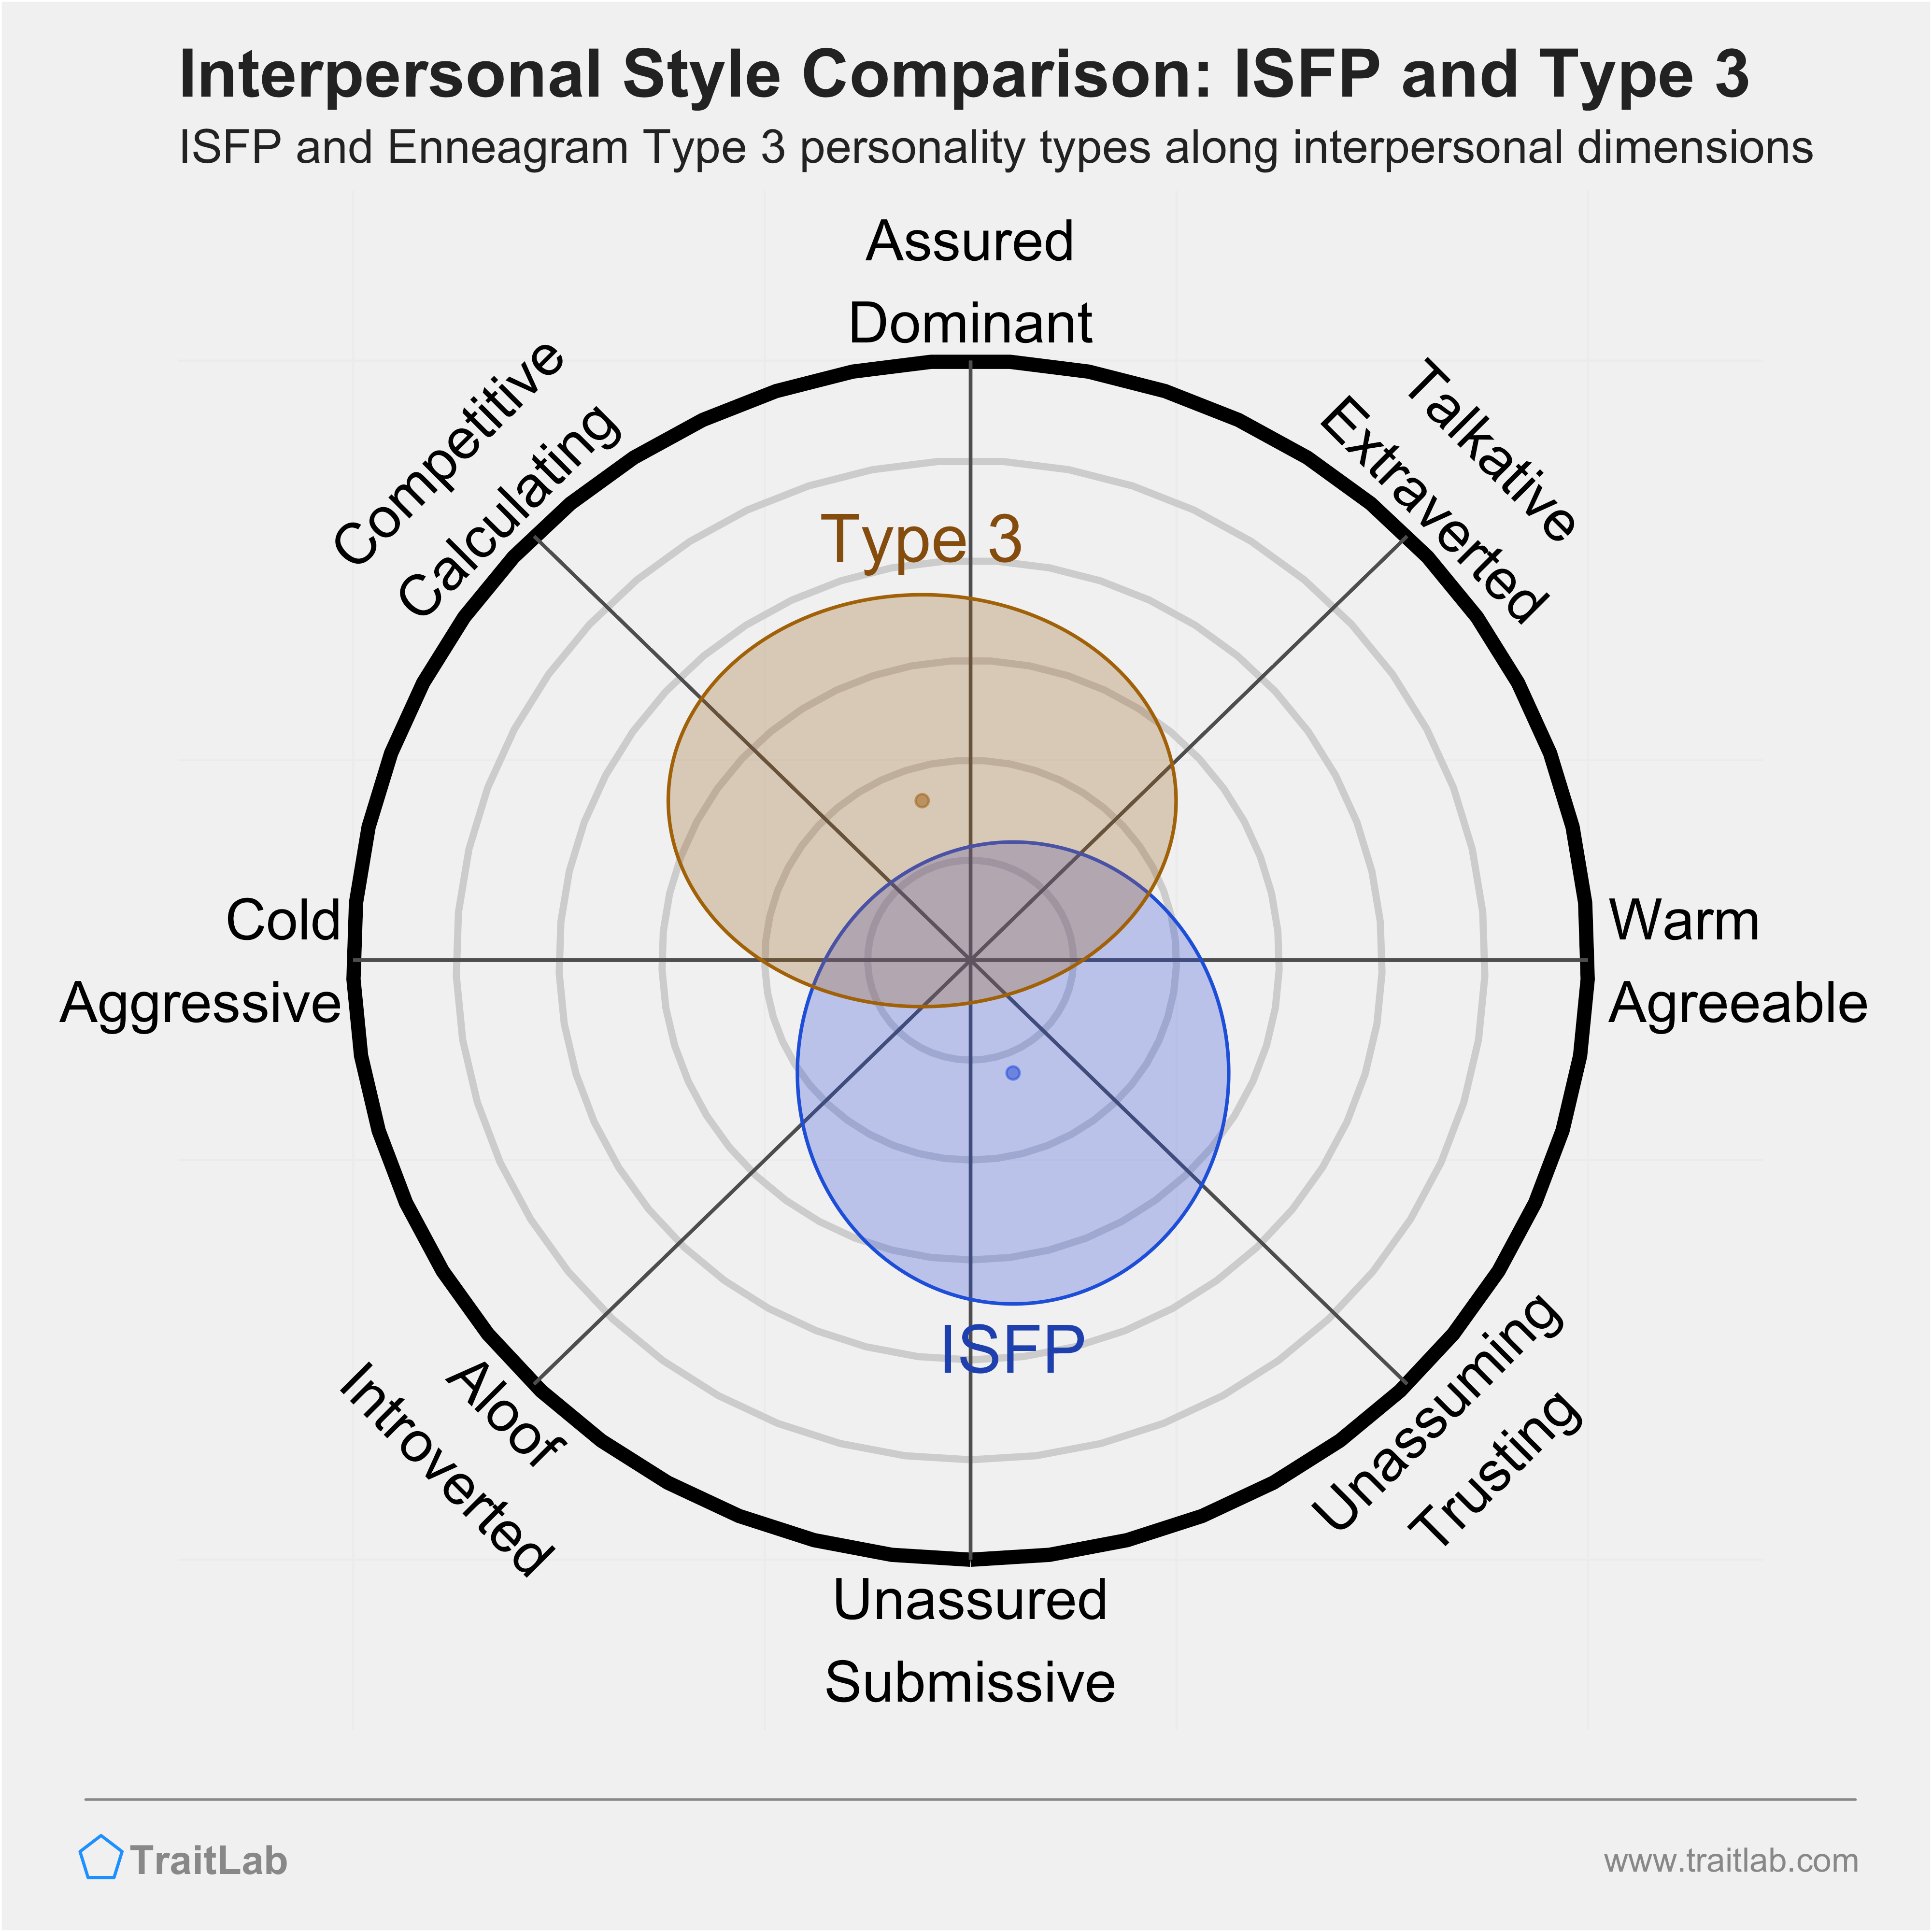 Enneagram ISFP and Type 3 comparison across interpersonal dimensions